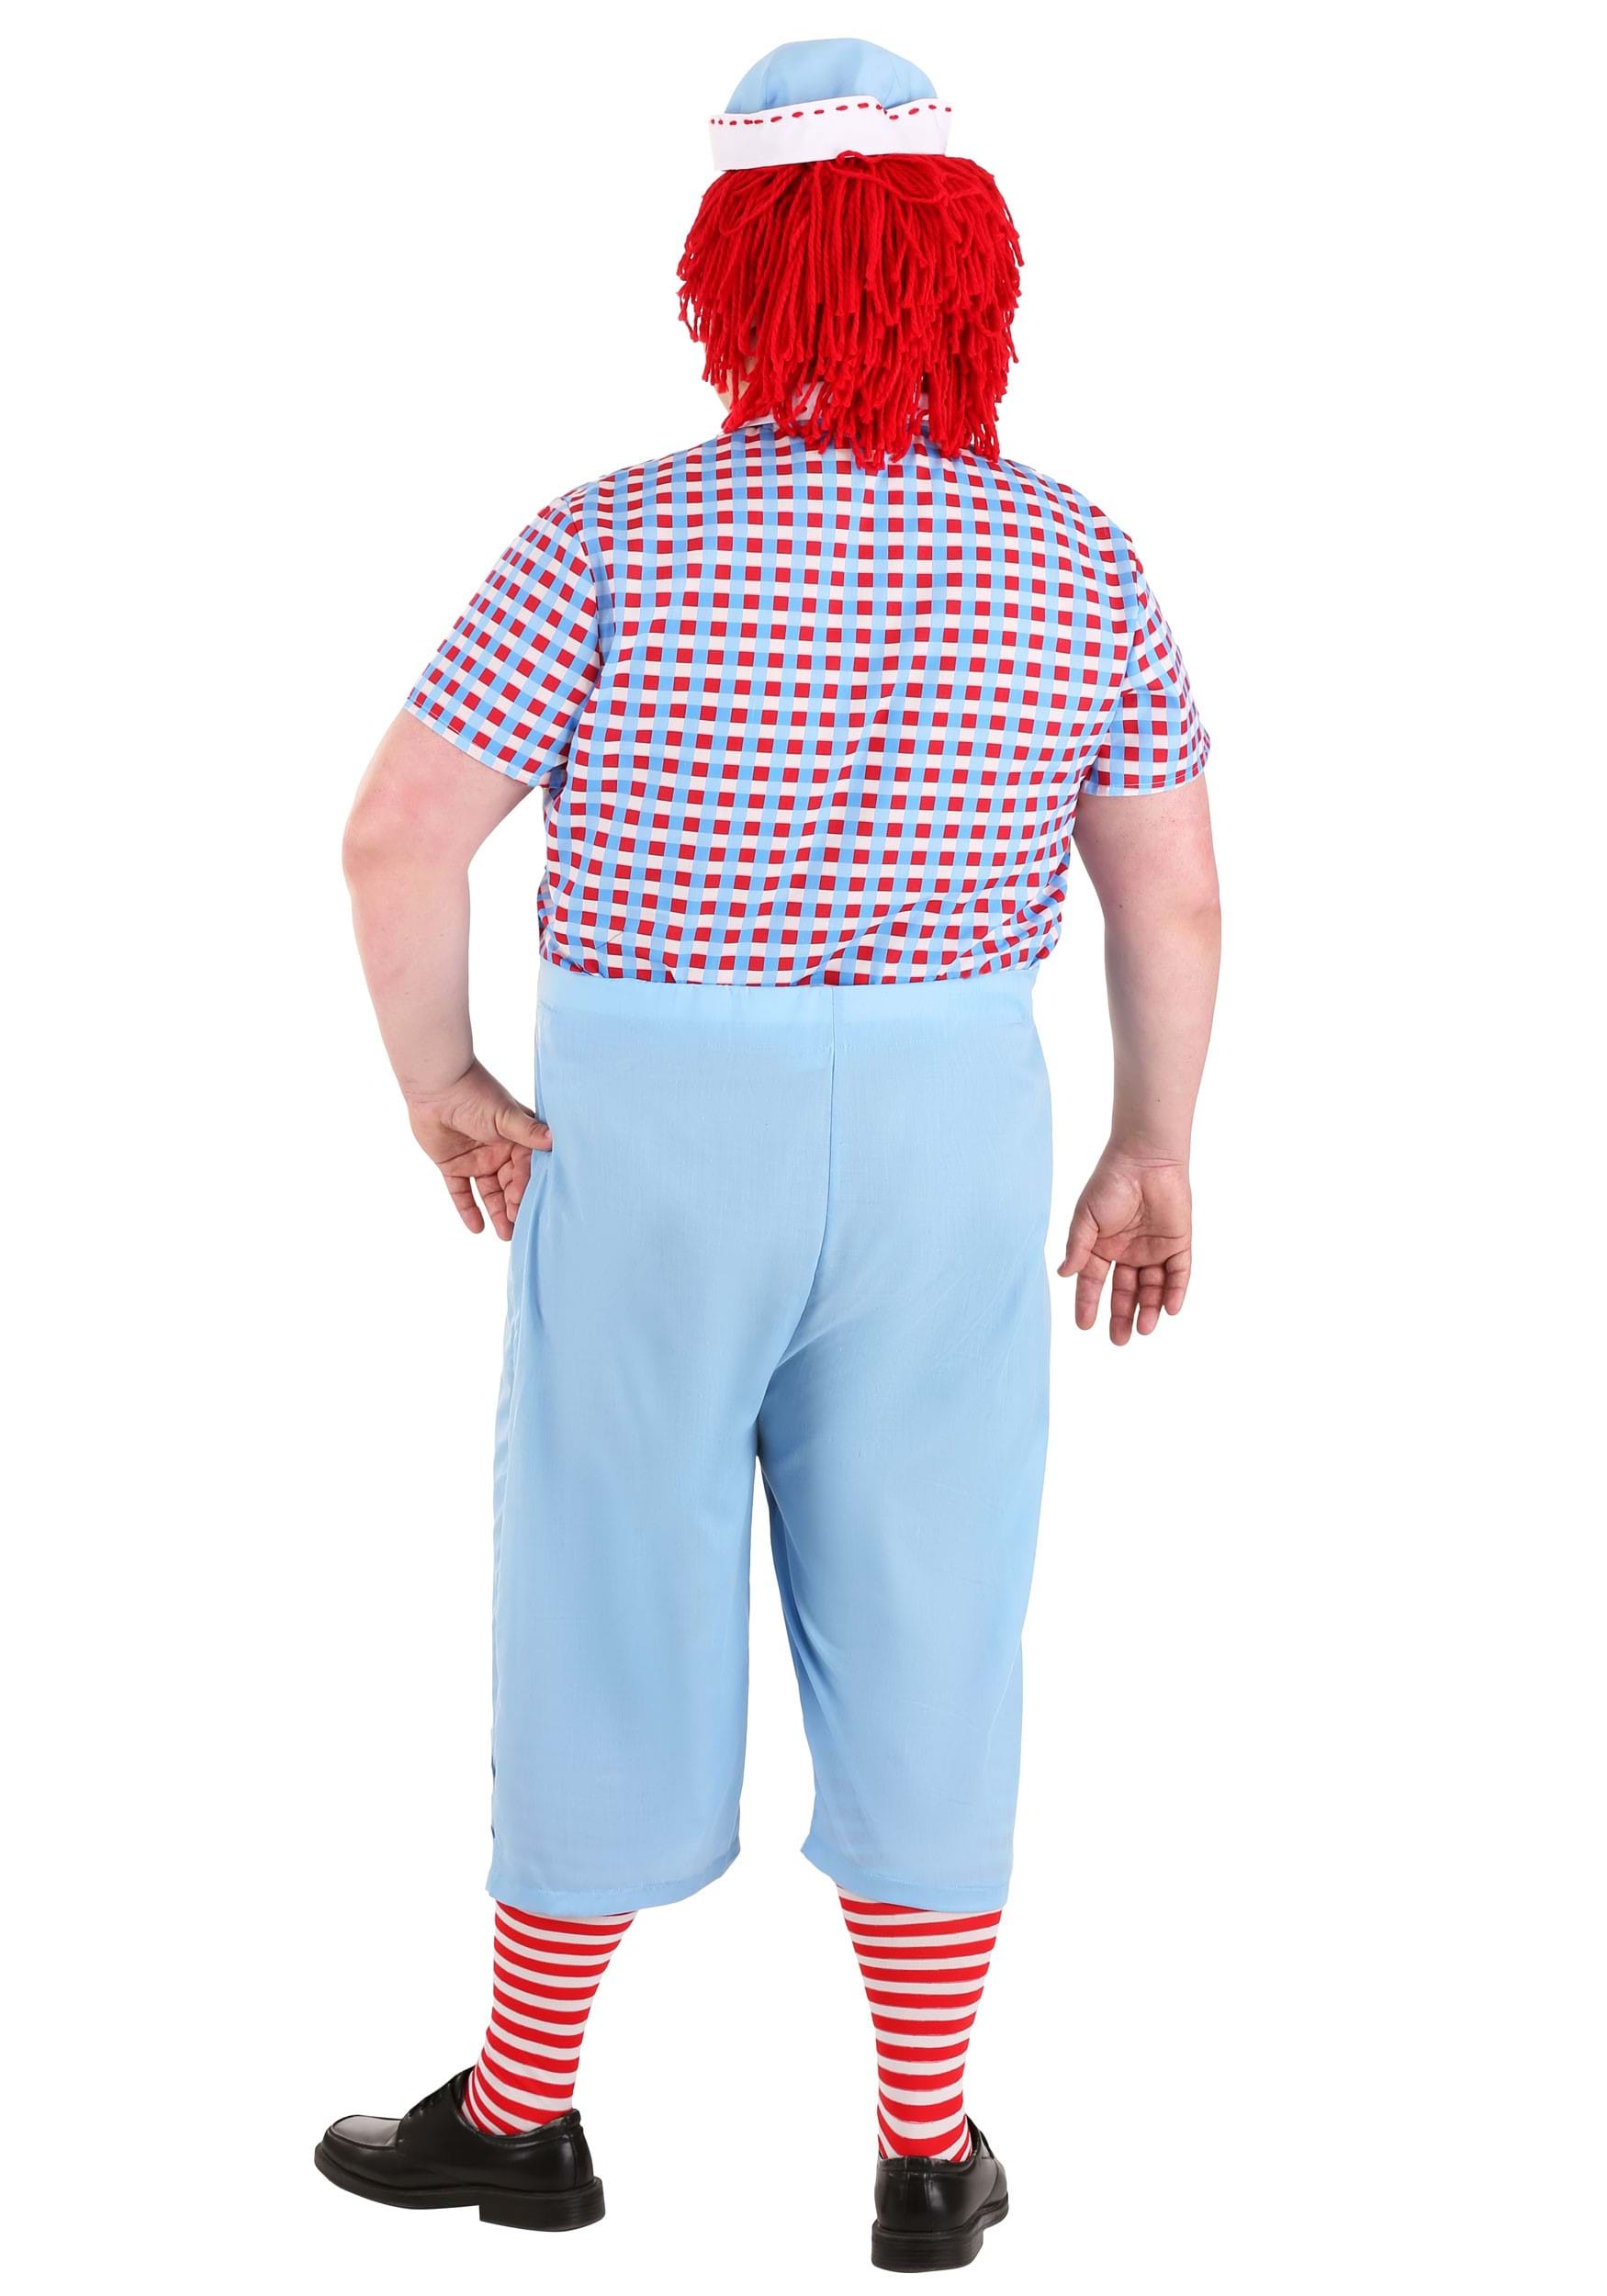 Plus Size Raggedy Andy Costume For Men